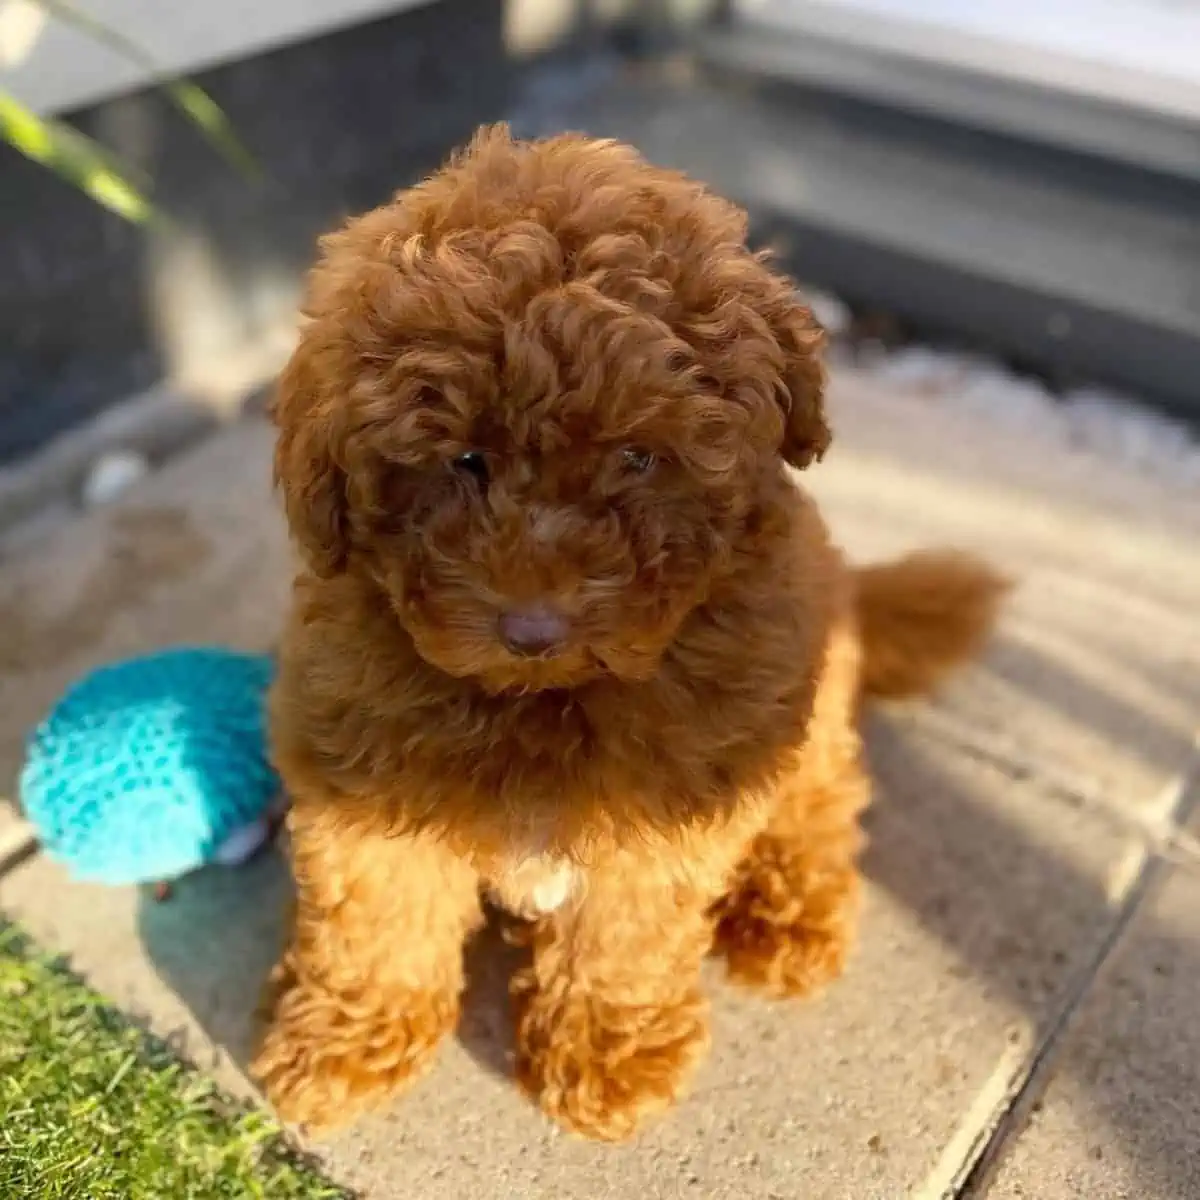 Toy Poodle and sunlight